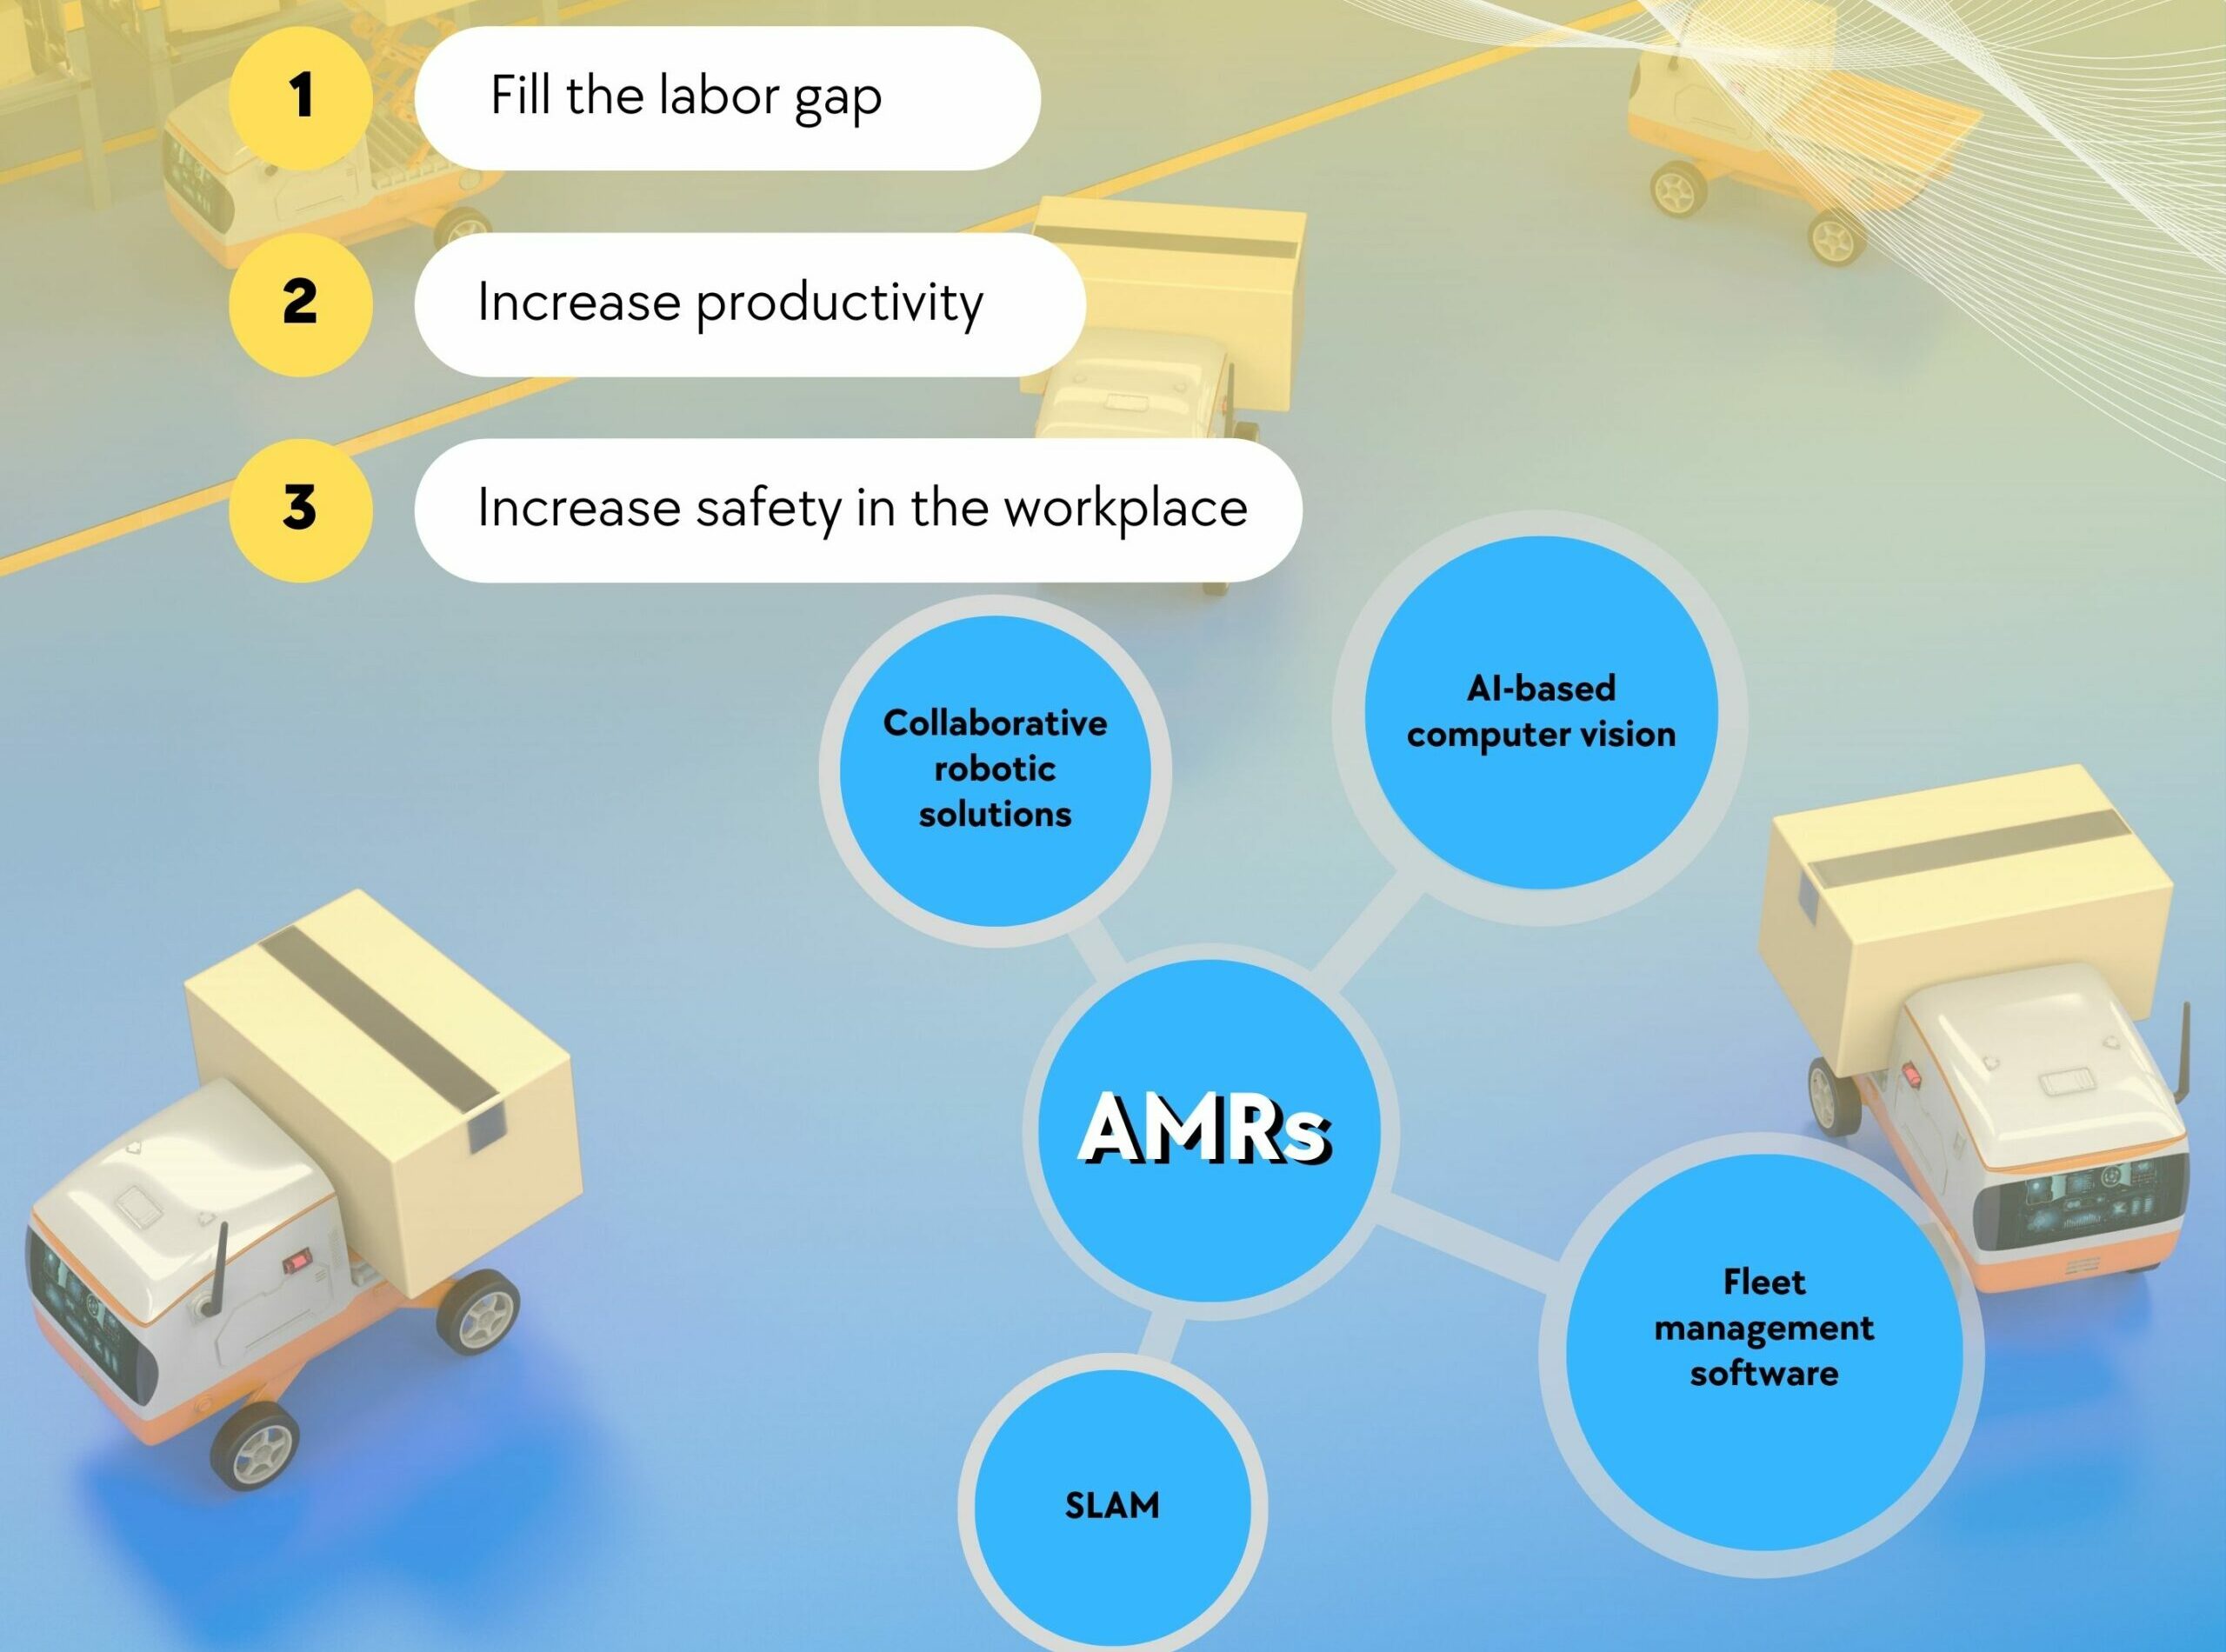 AMRs solve the Labor shortage issue